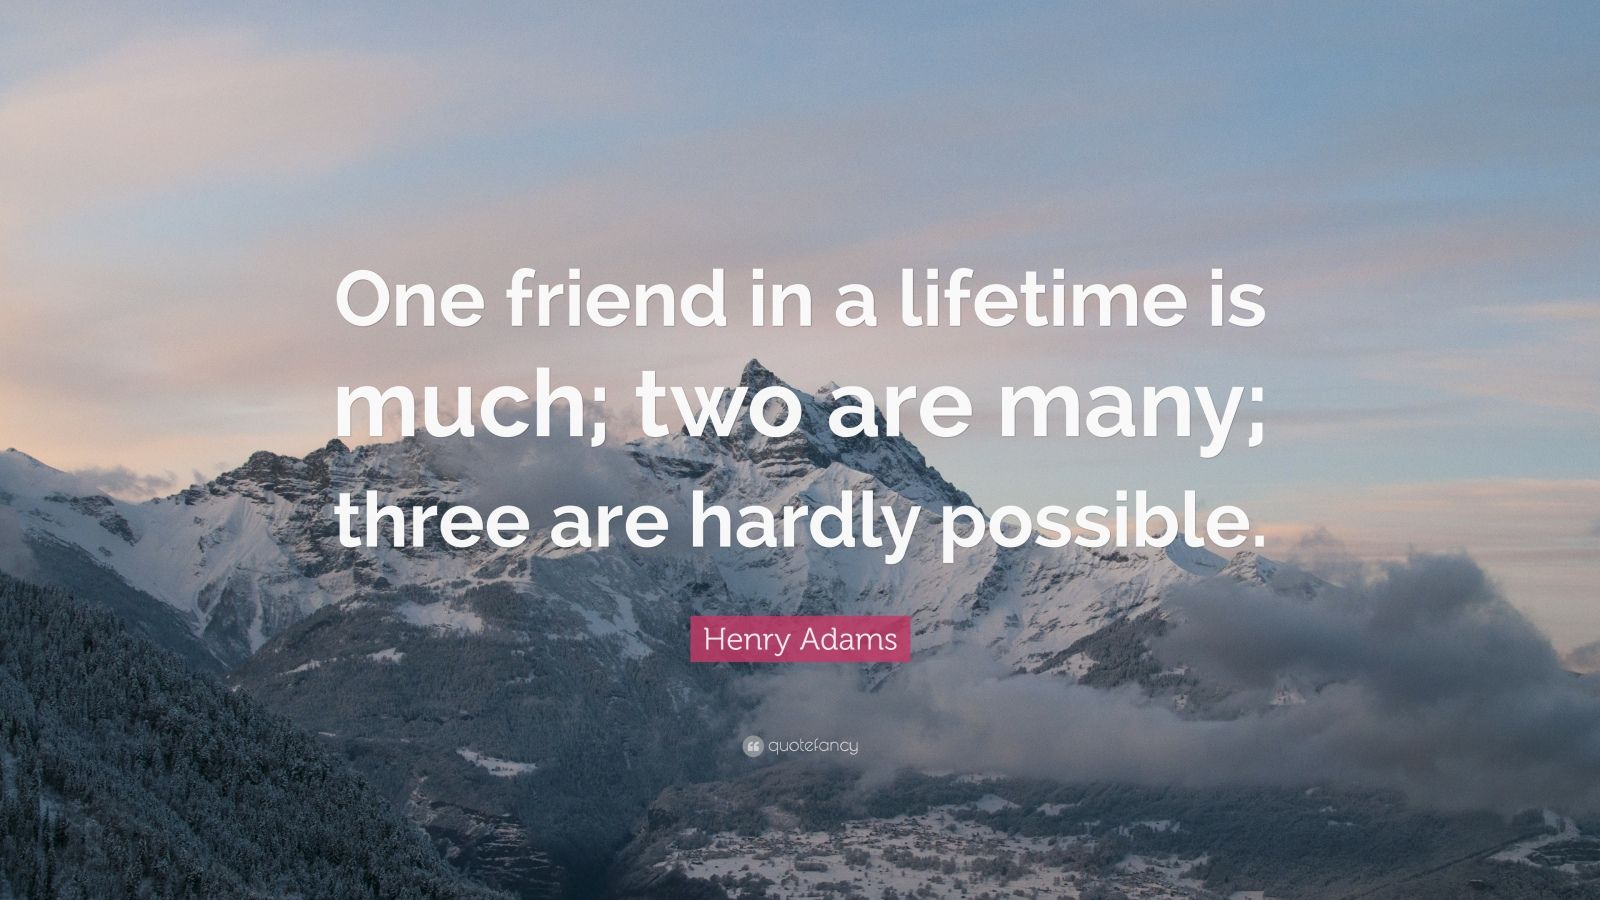 One friend in a lifetime is much; two are many; three are hardly possible.